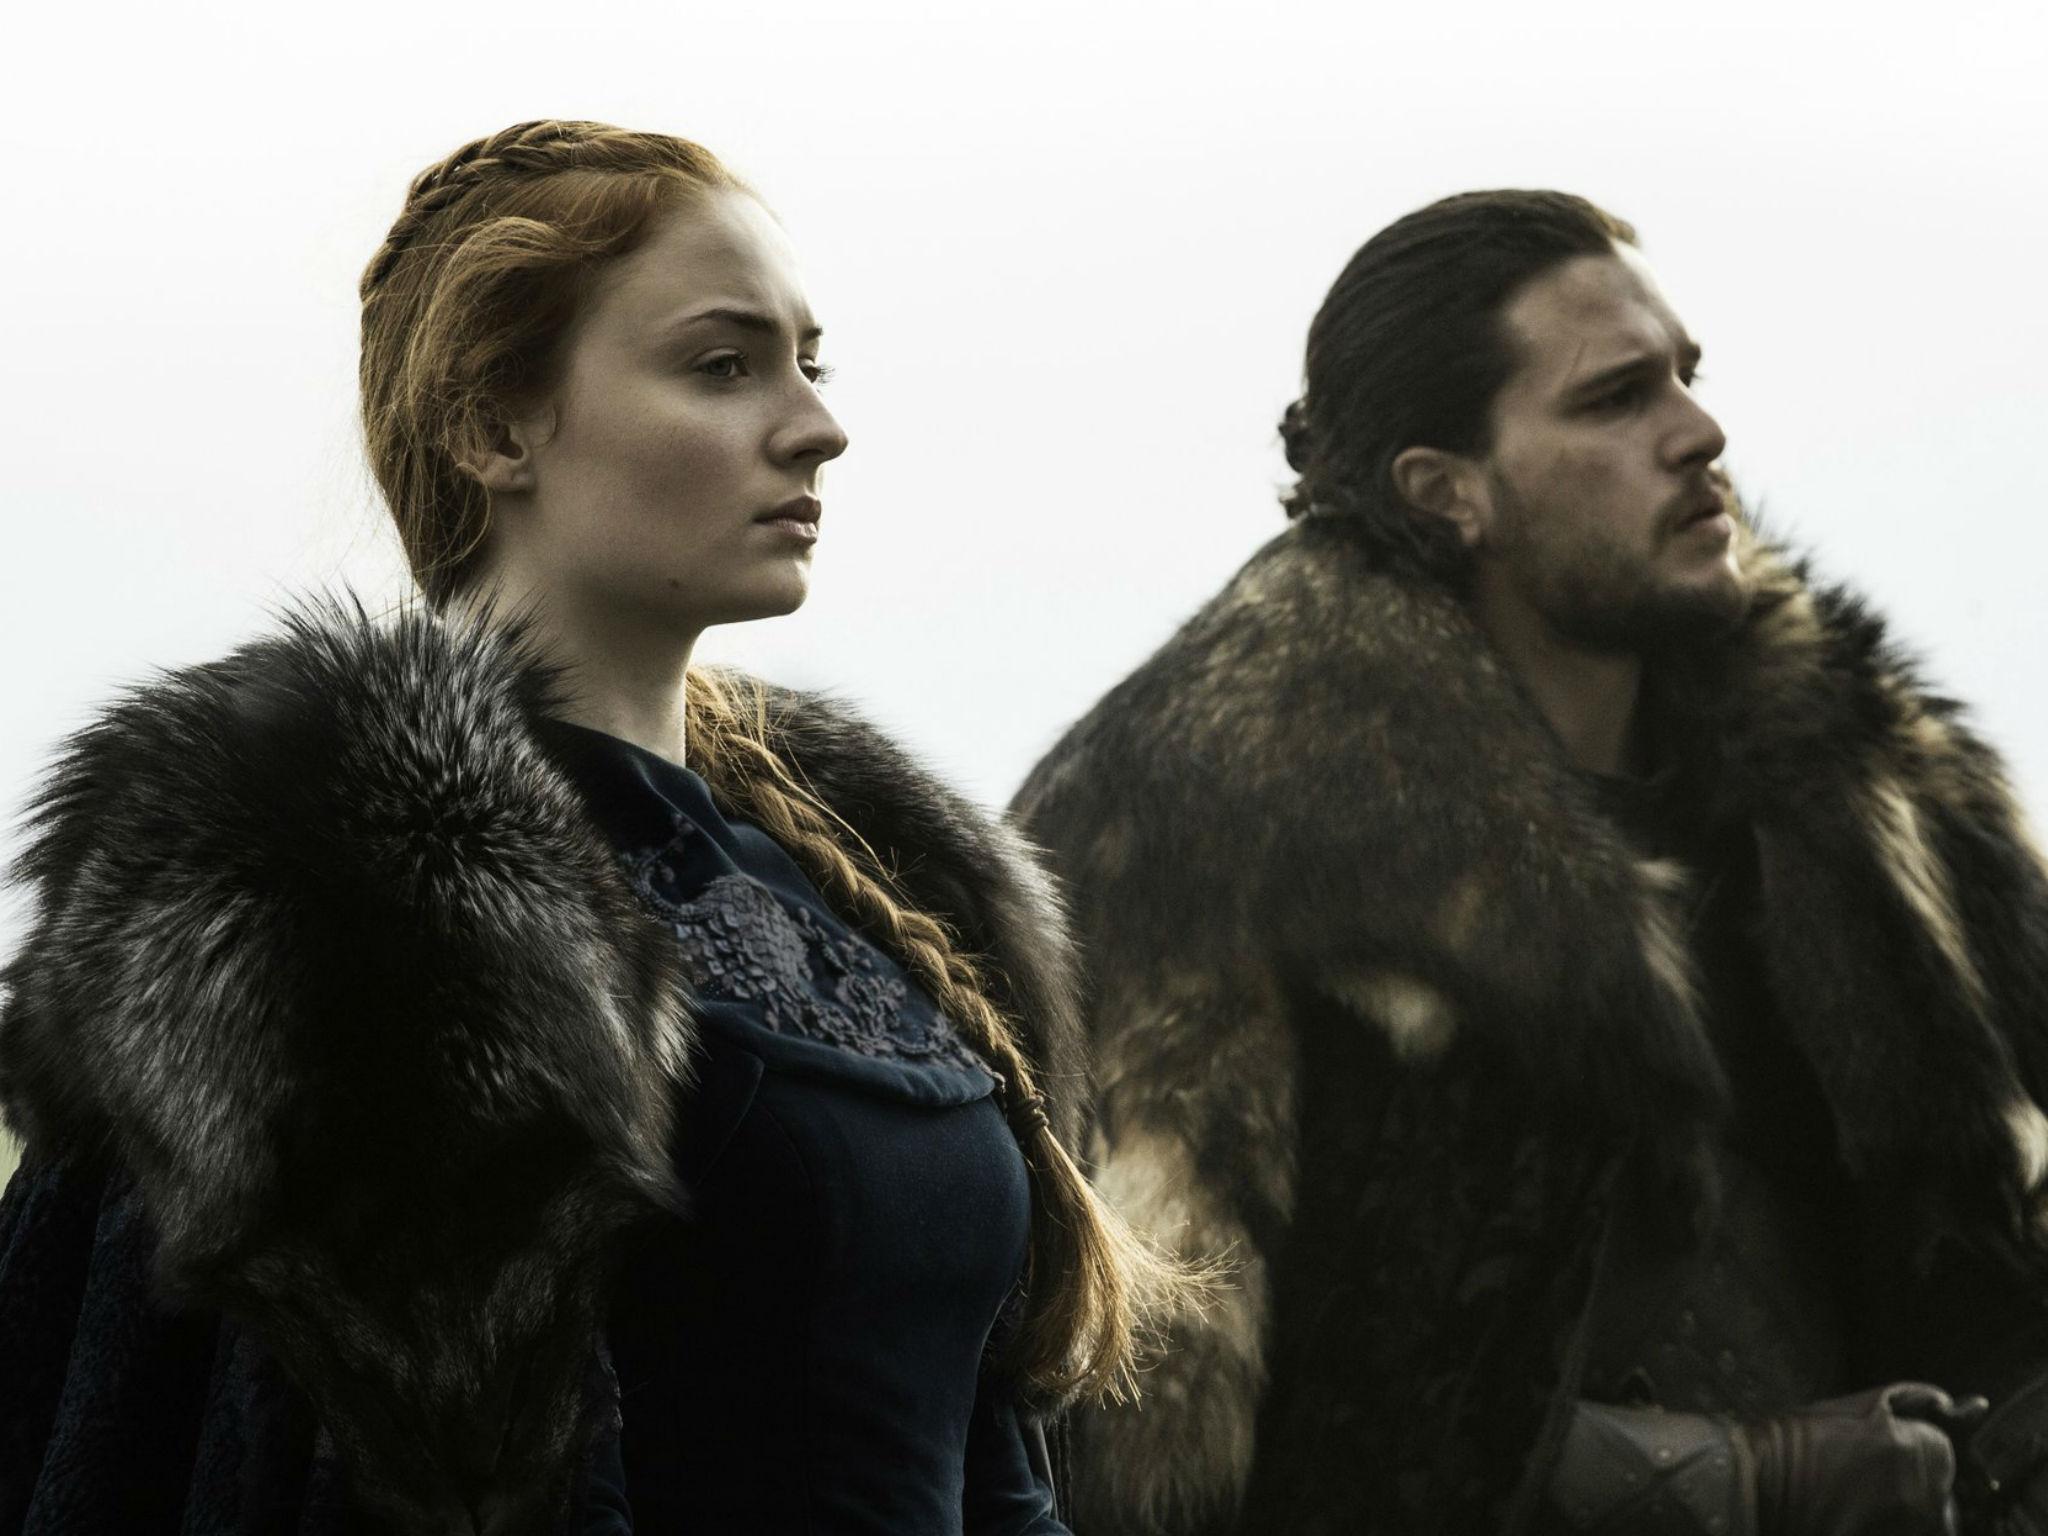 'Game of Thrones' returns for its final season